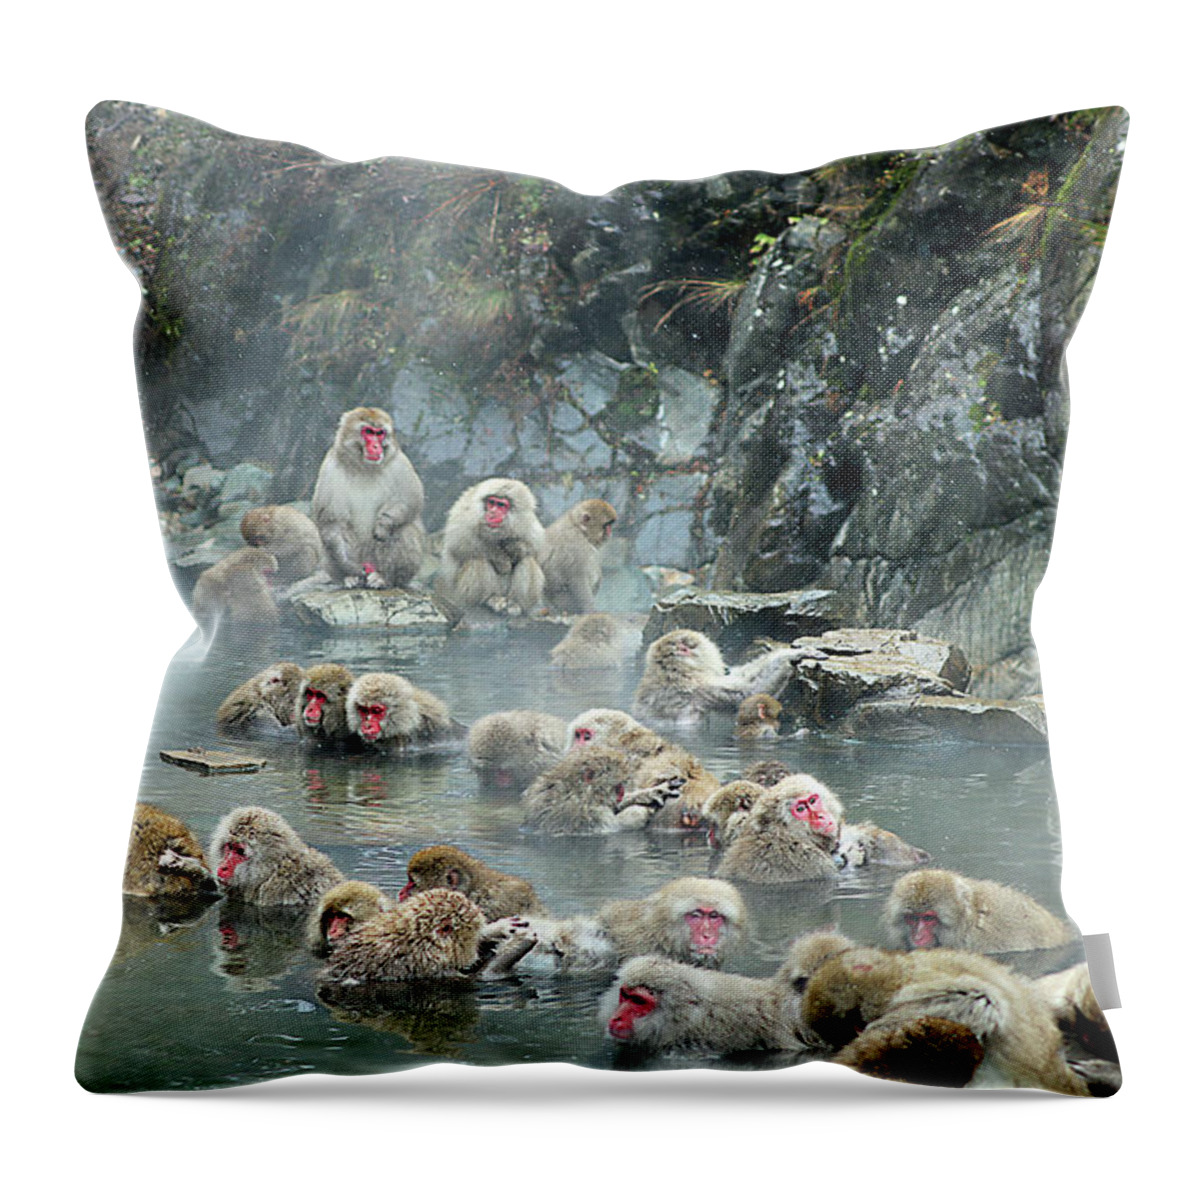  Throw Pillow featuring the photograph Japan 49 by Eric Pengelly